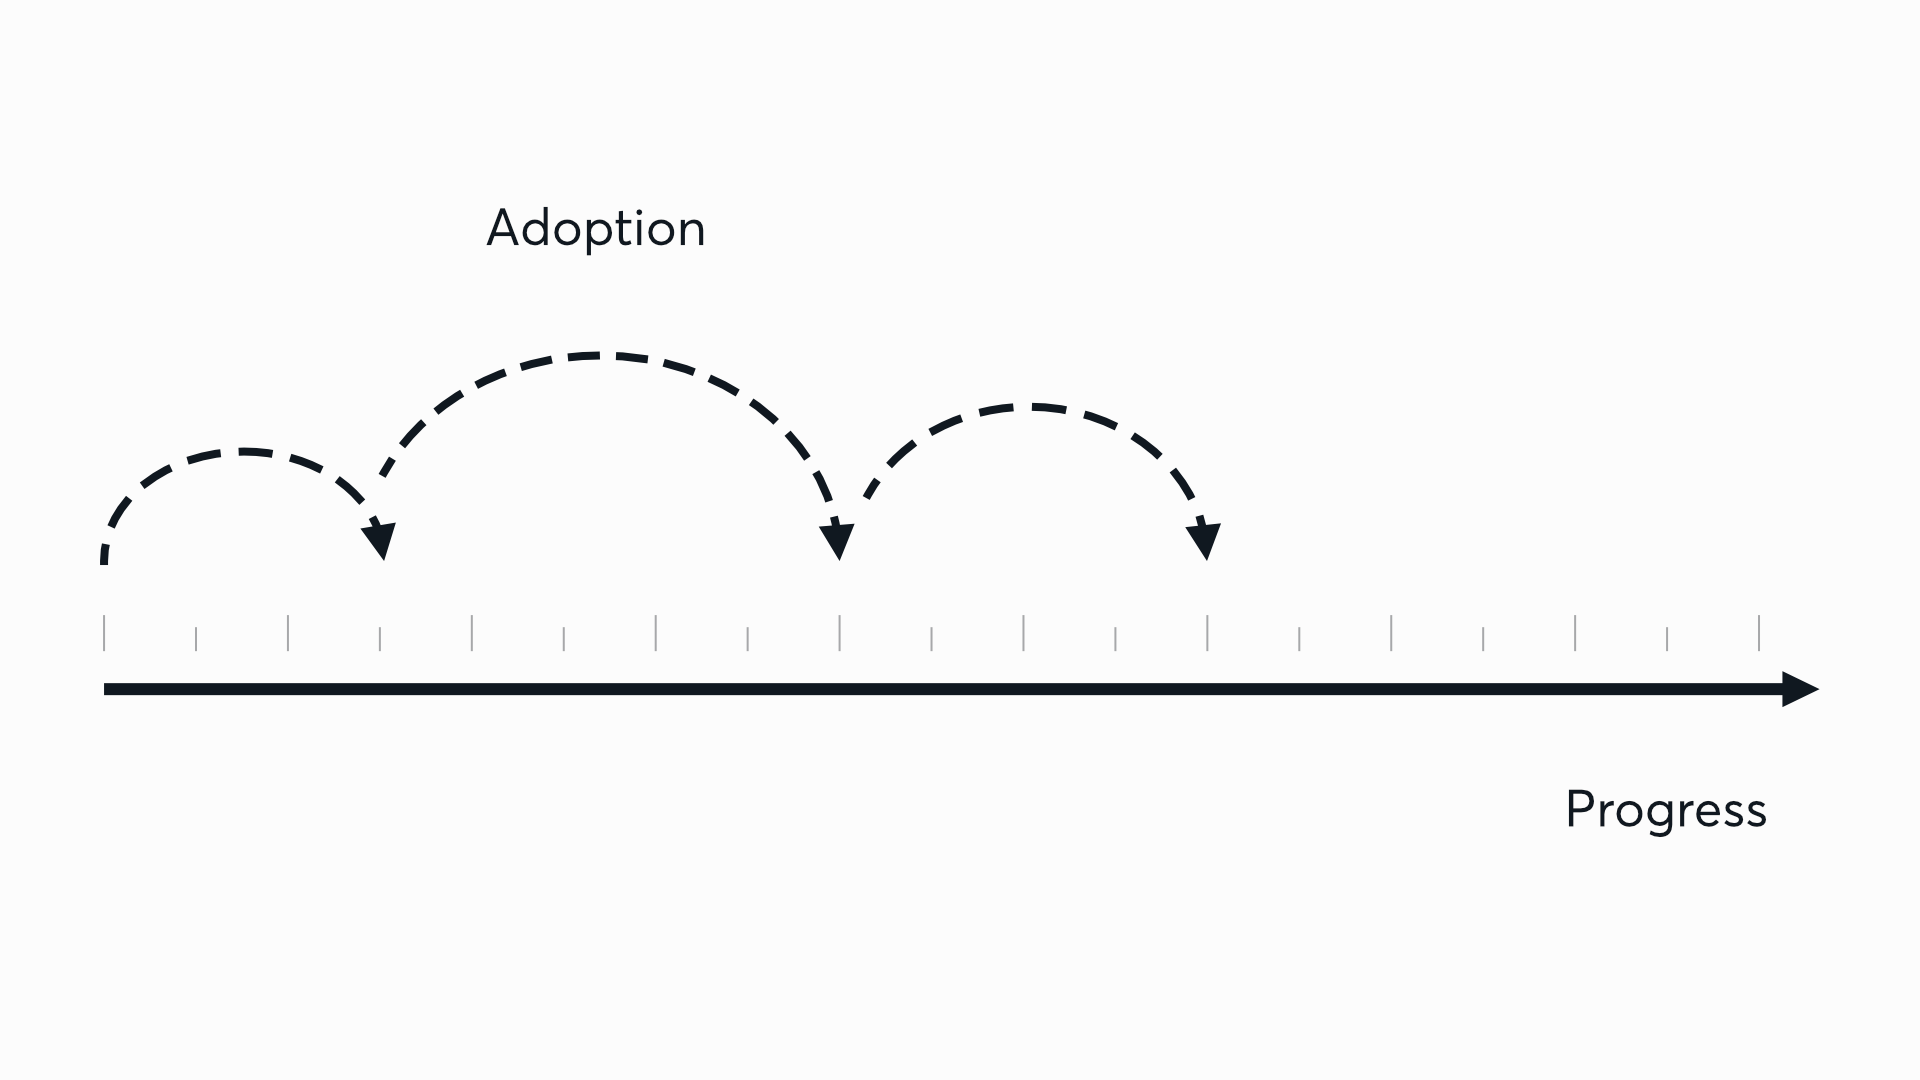 A linear line with an arrow pointing forward, labeled 'progress.' There are a few arced leaps of progress on top of the line, jumping from left to right, labeled 'adoption.' The final leap, however, lands well short of the furthest edge of the straight 'progress' line.